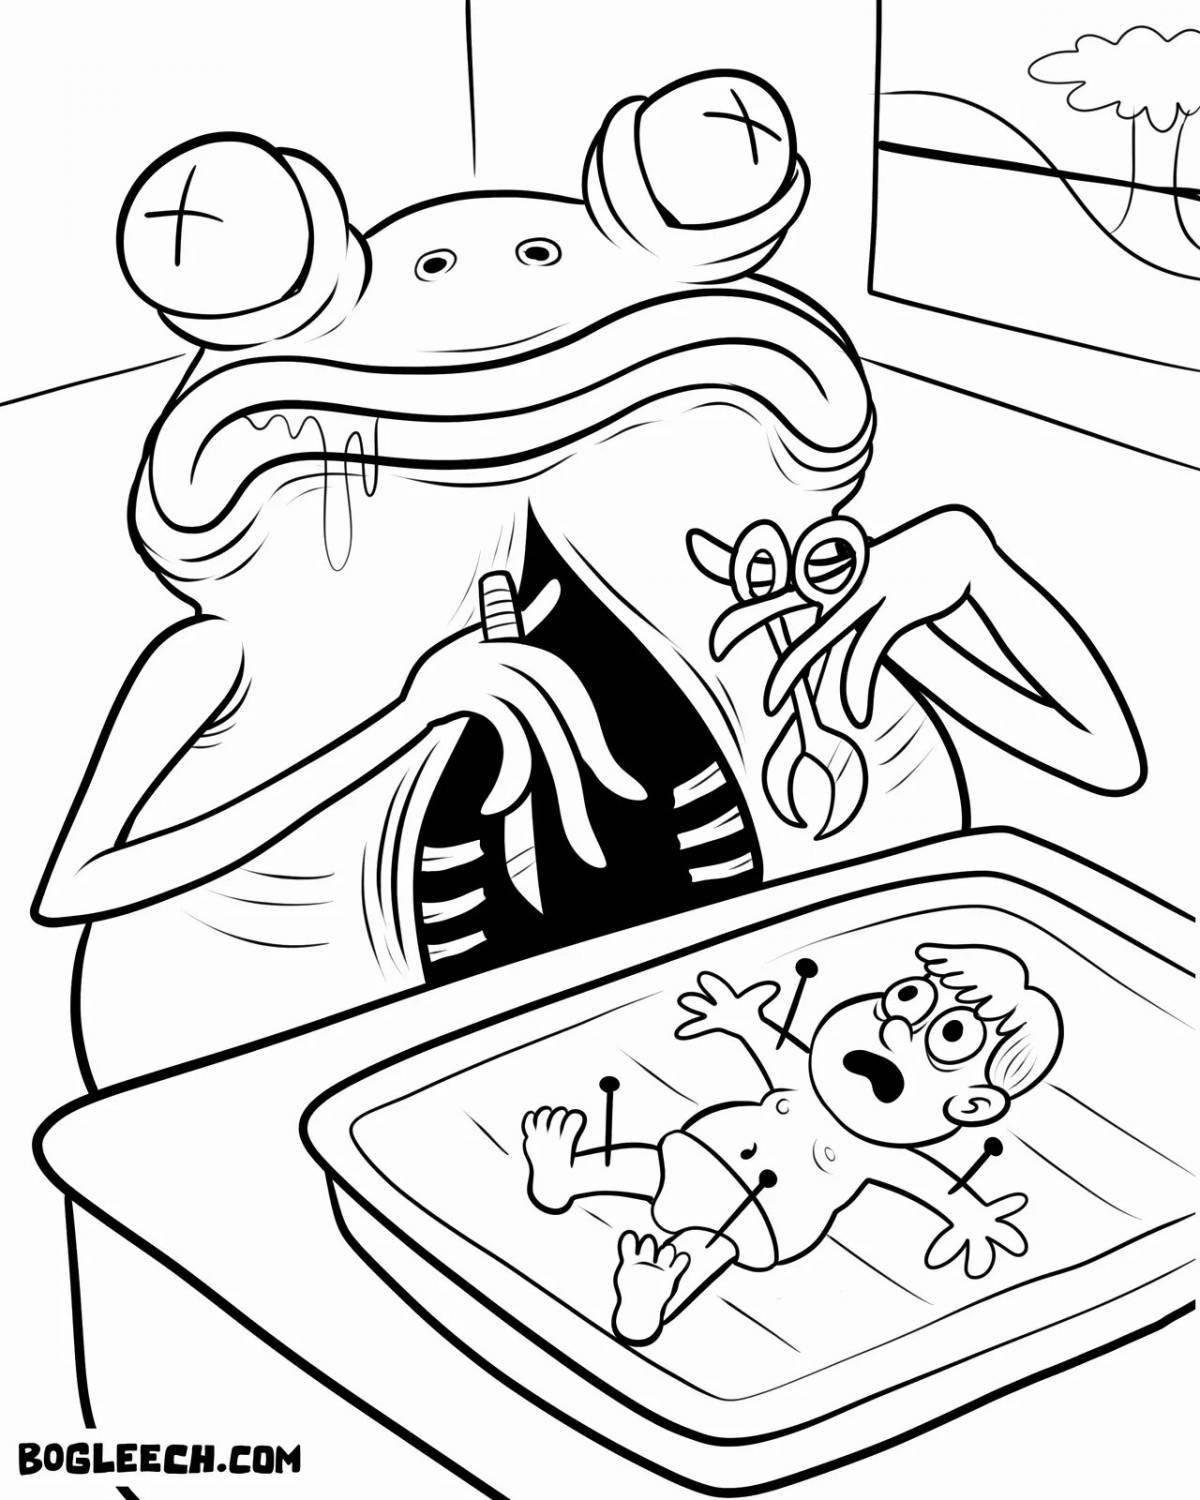 Disturbing horror coloring pages for kids